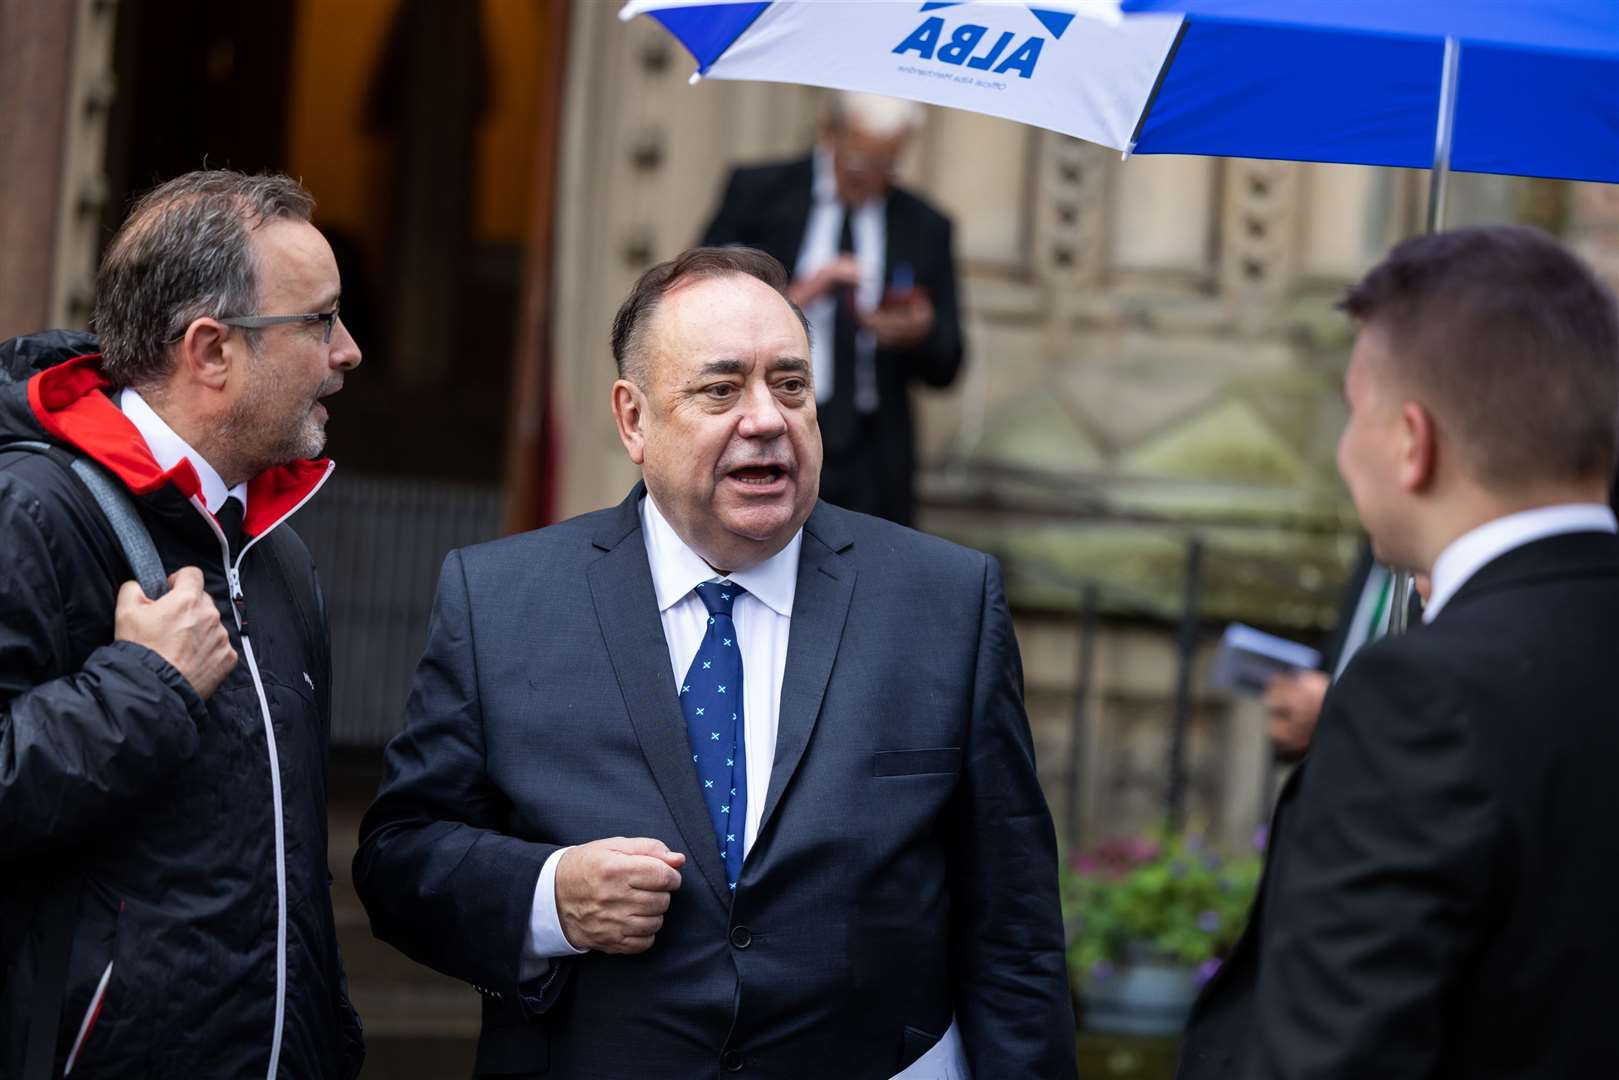 Alex Salmond suggested an electoral pact (Paul Campbell/PA)